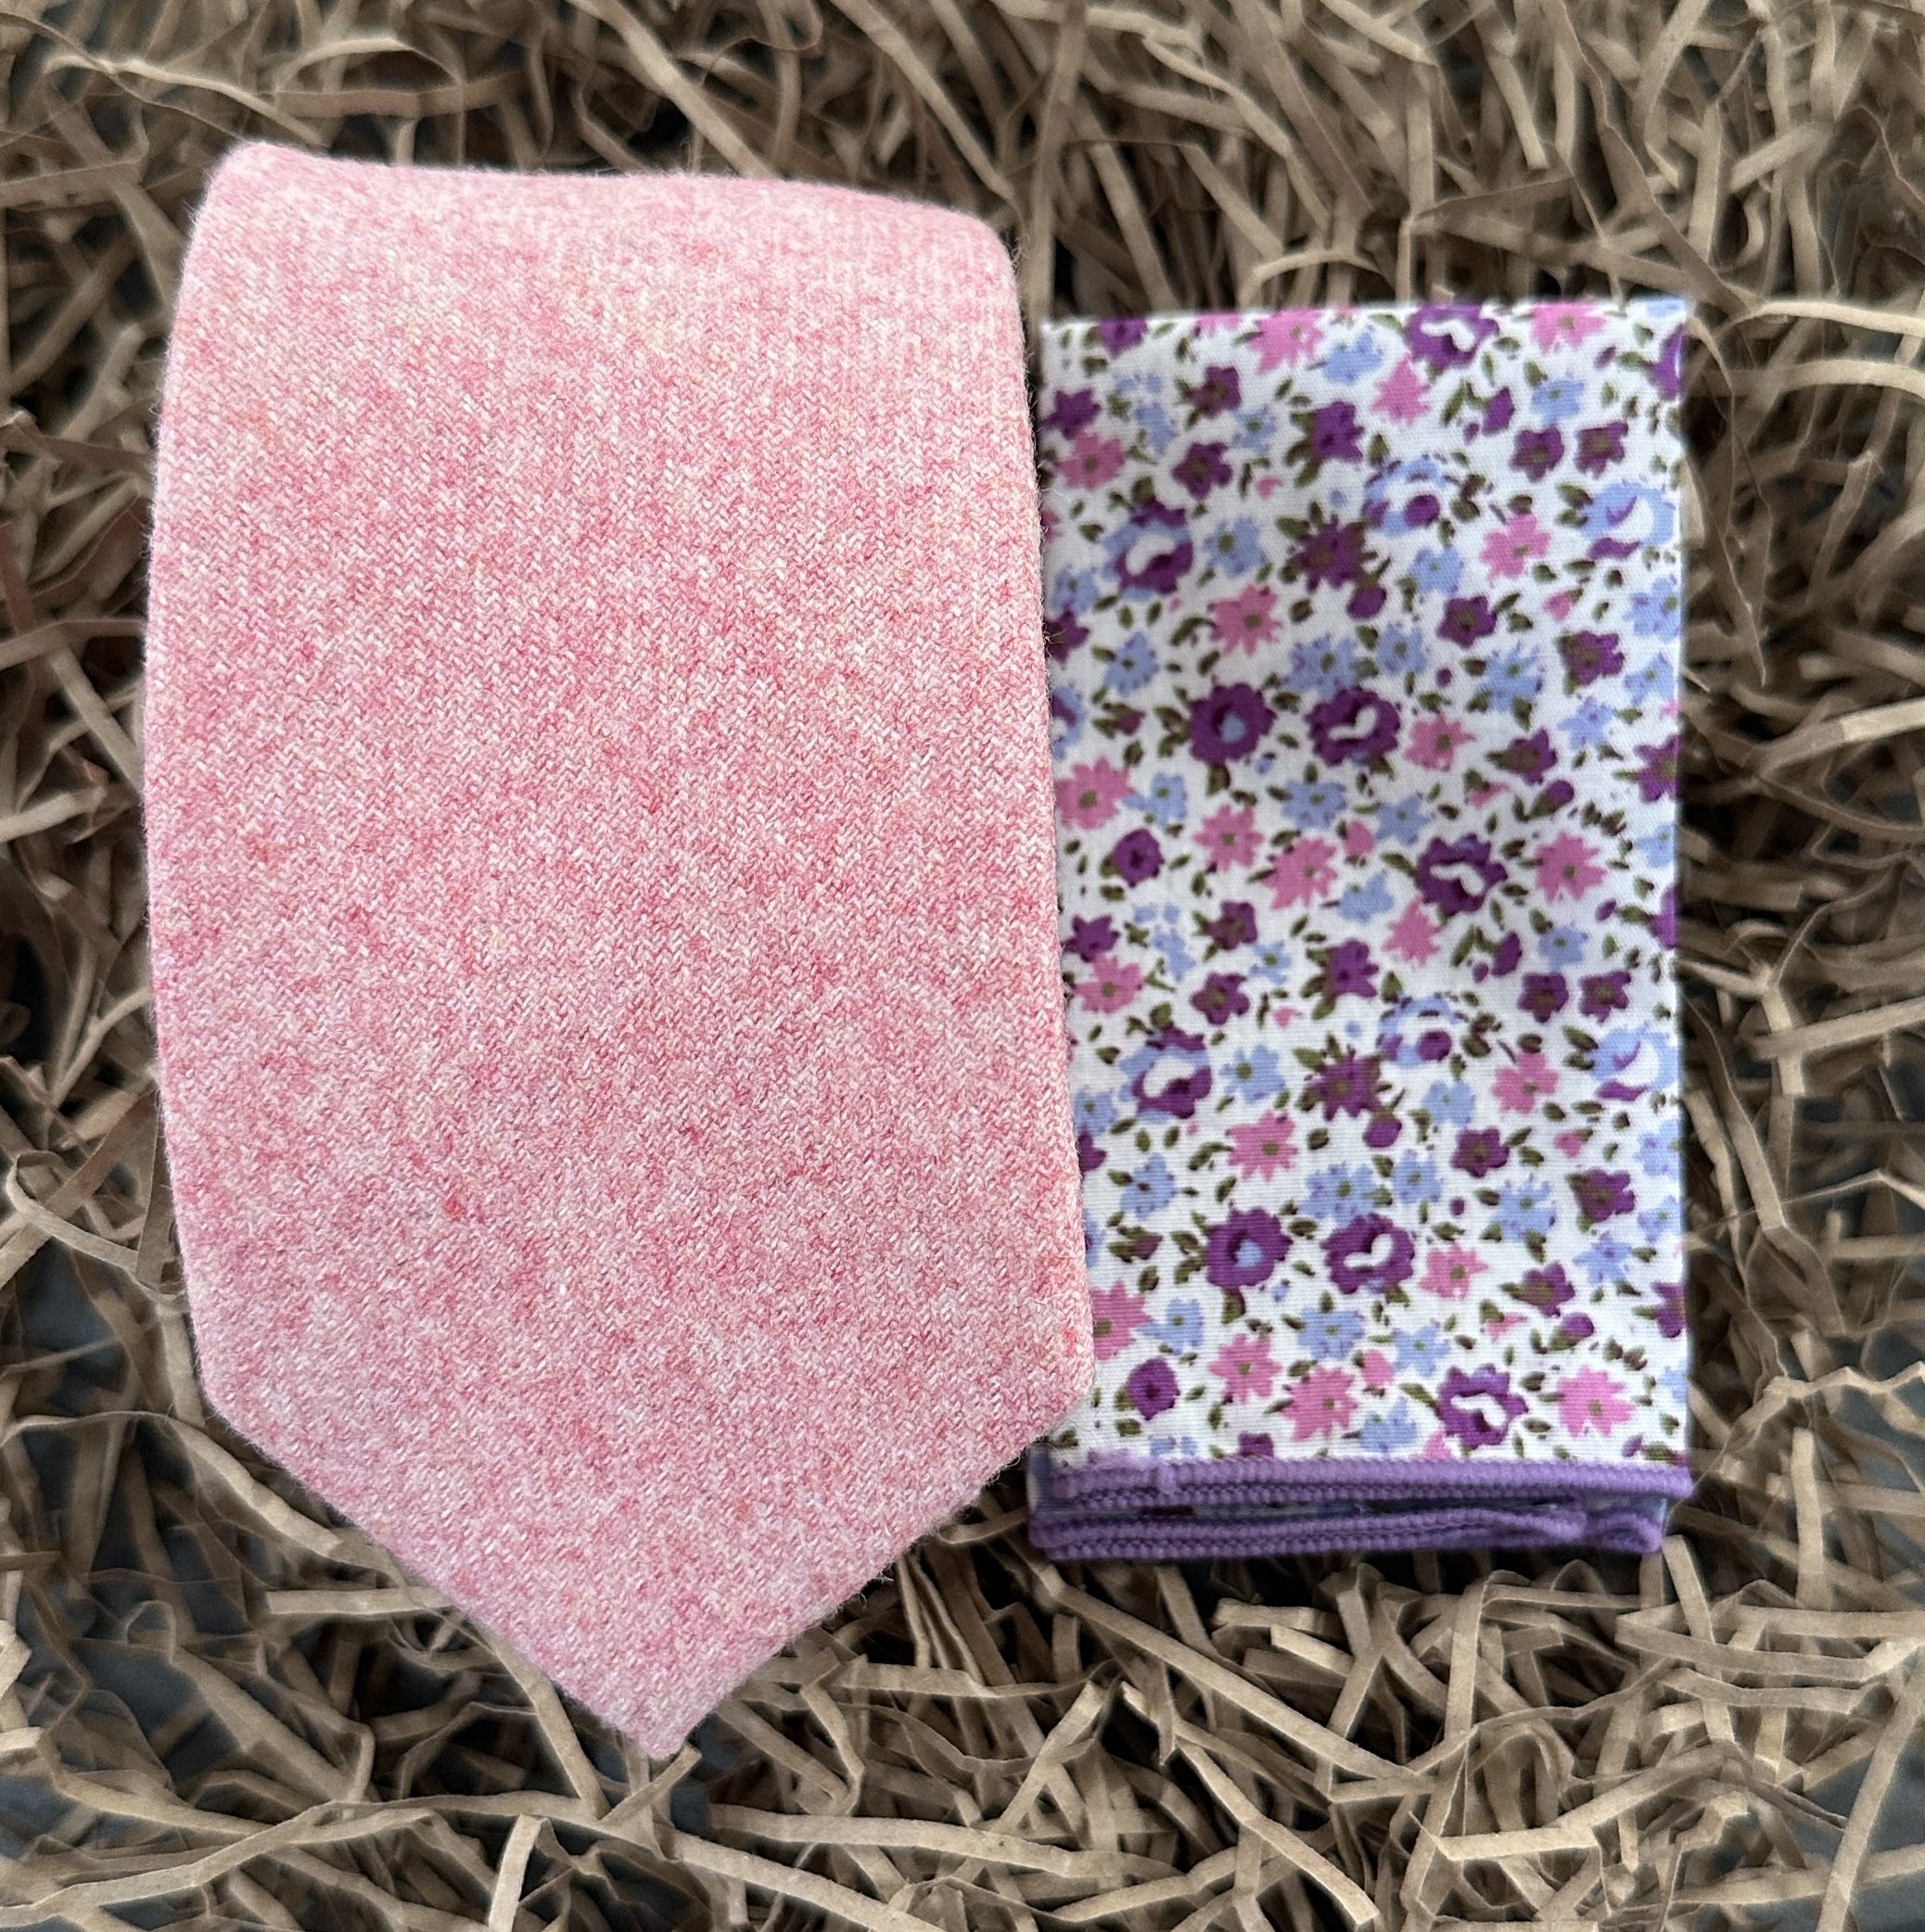 A pink mens wool tie and lilac floral pocket handkerchief for wedding ties, mens gifts and groomsmen gifts.